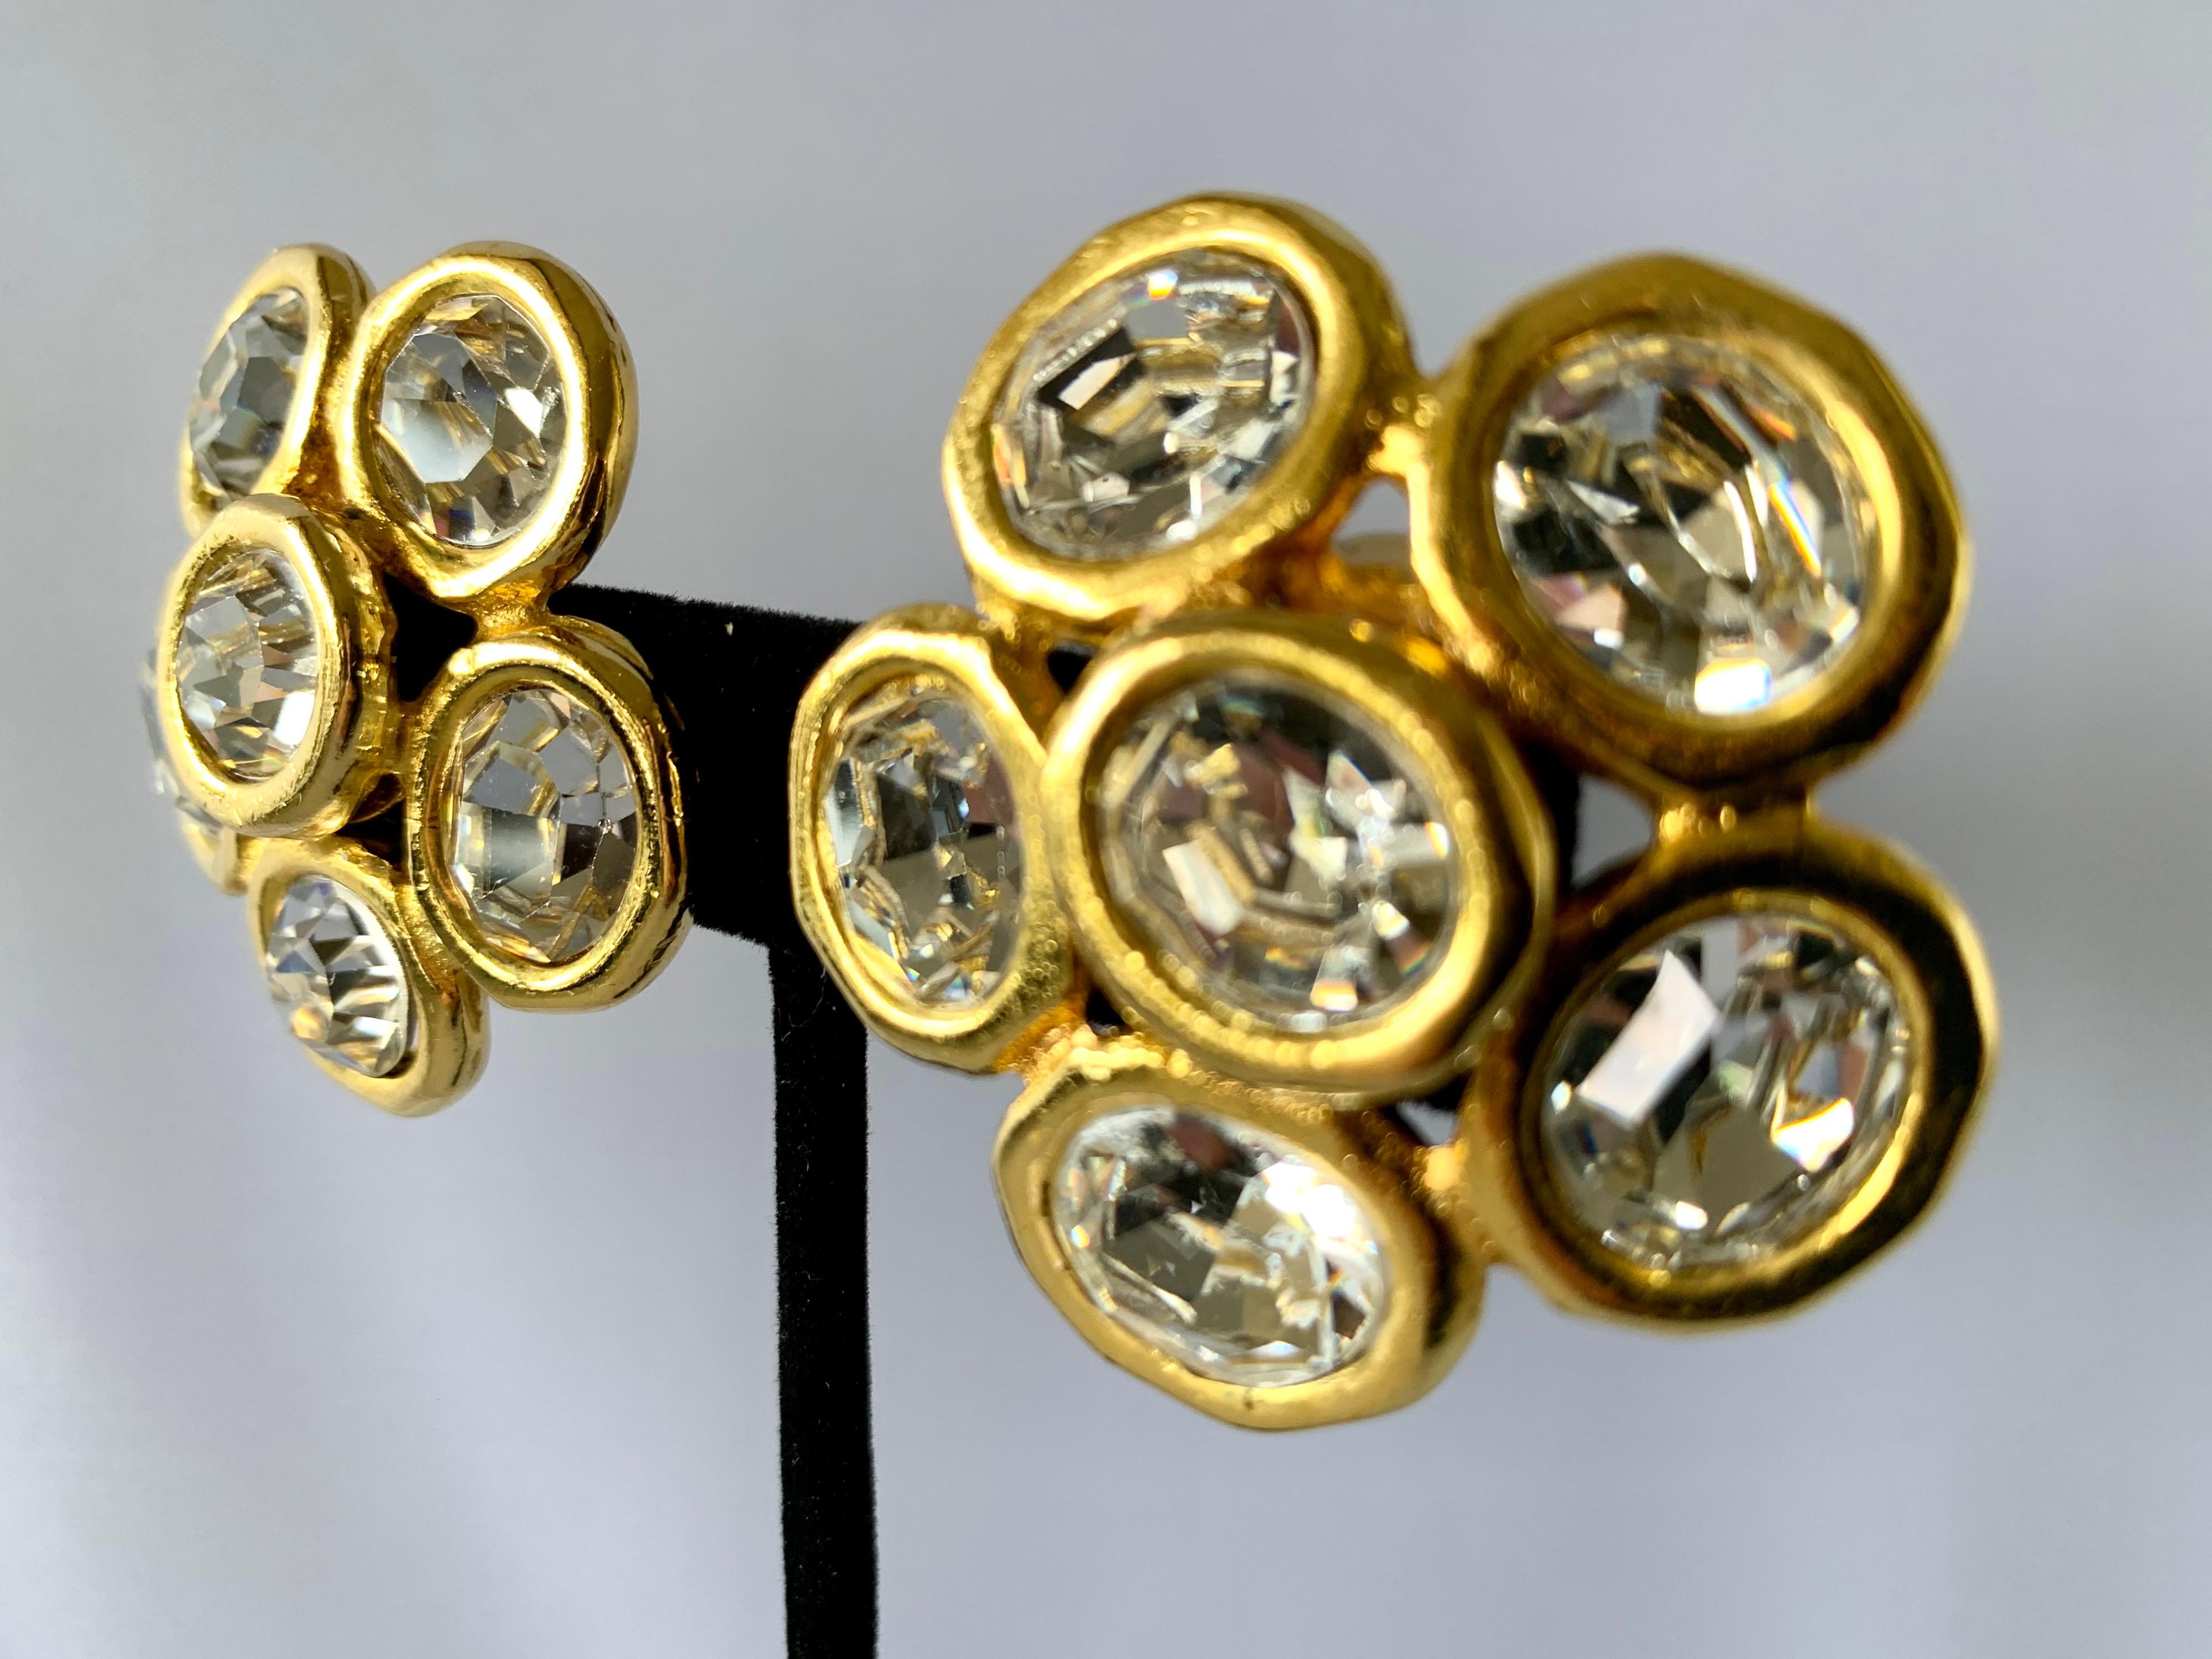 Fabulous large vintage Chanel headlight statement clip-on earrings - comprised of gilt metal 